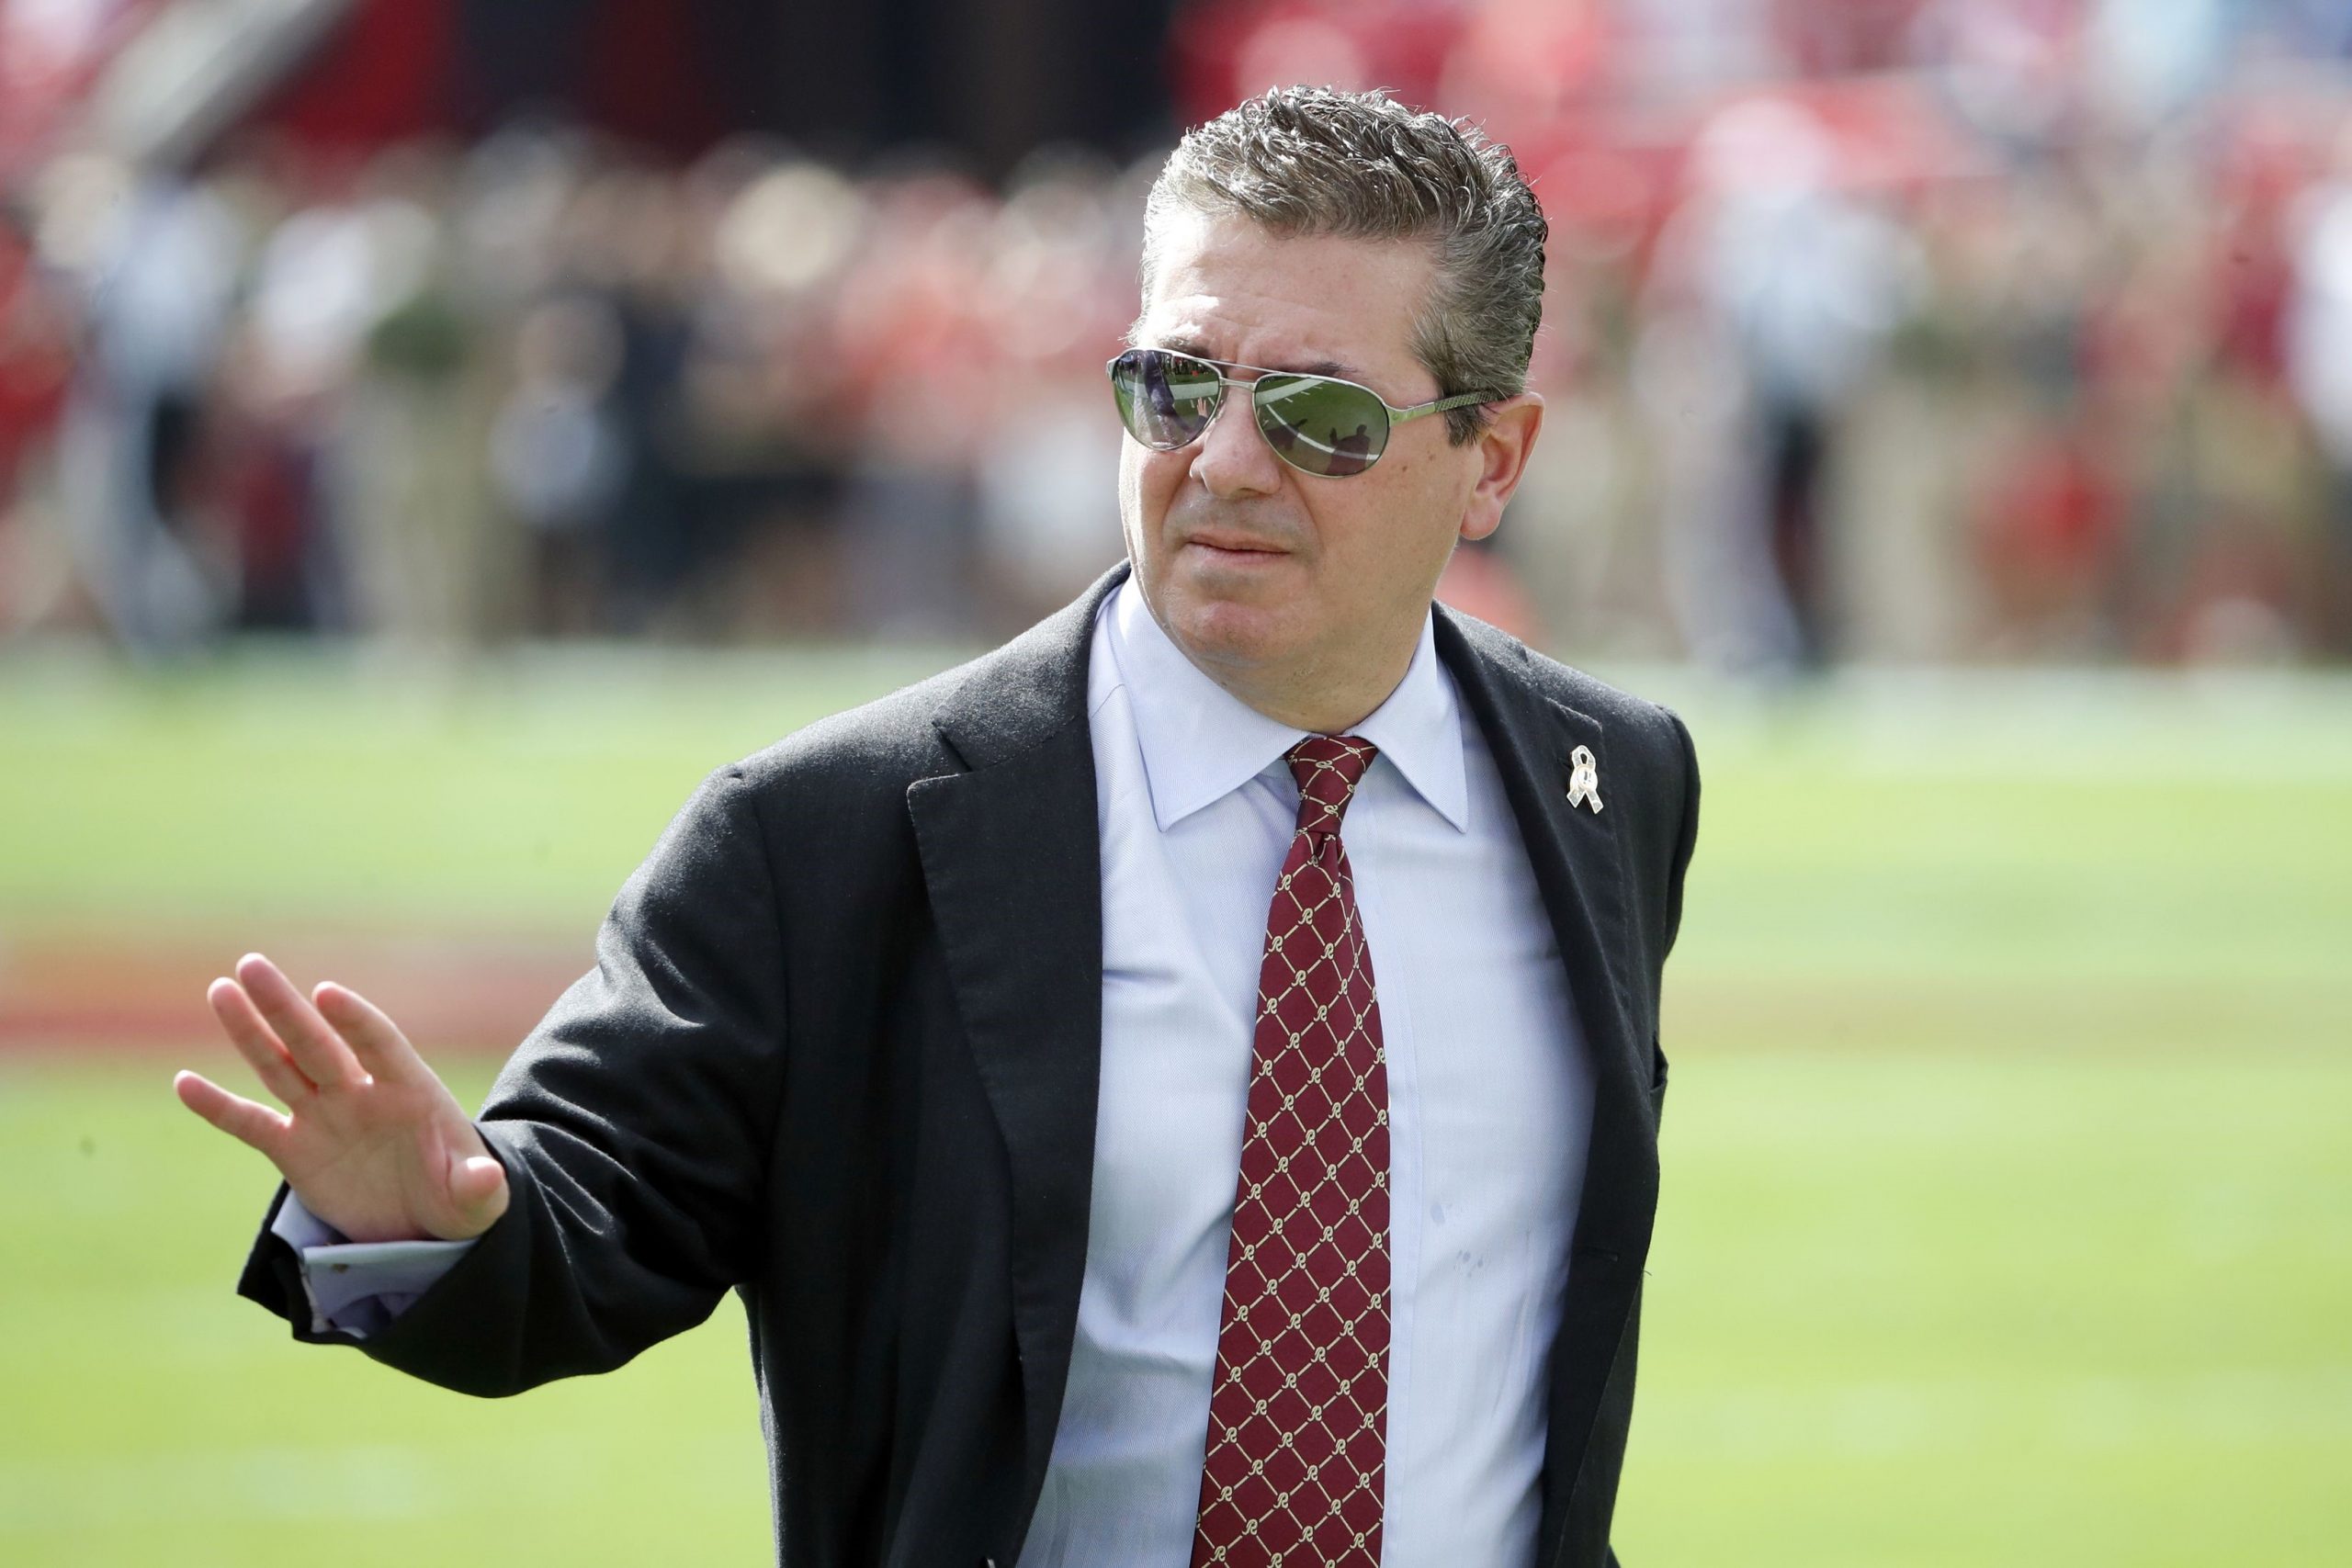 Photo of Philanthropist Dan Snyder Continues To Seek Opportunities To Make A Difference